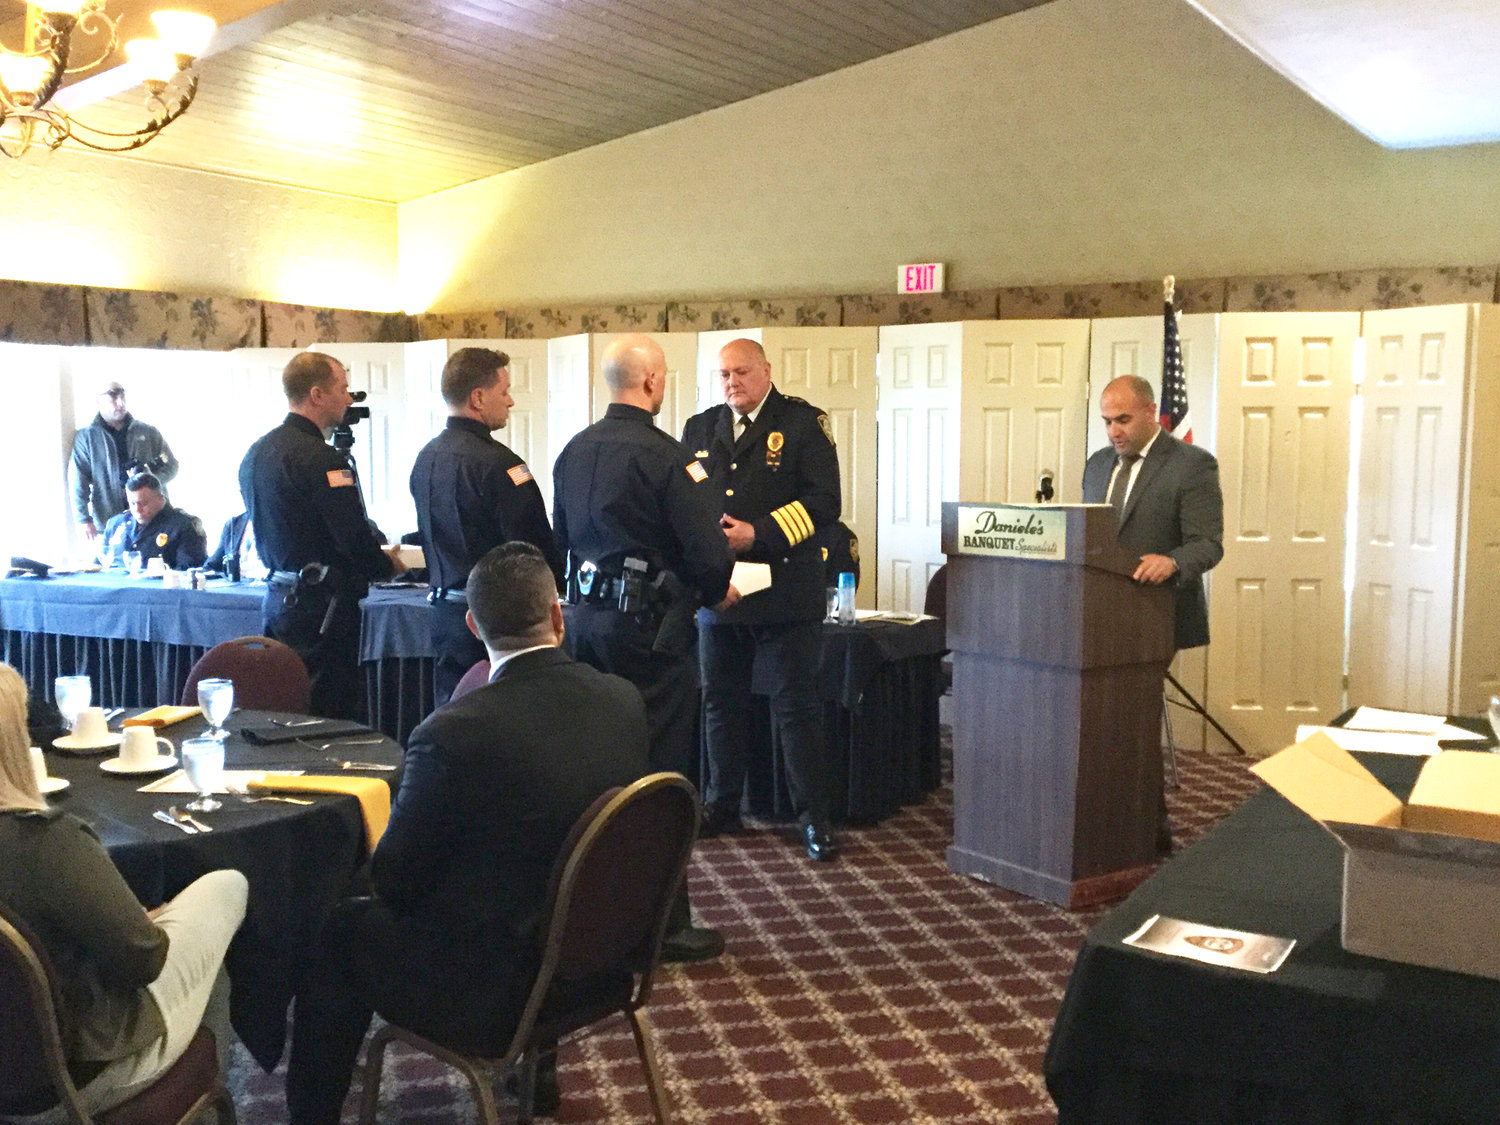 Three Utica police officers — Joseph Aiello, Brian Baye, and Alan Merrick — are awarded Officer of the Year during Thursday’s ceremony due to their efforts to save two young children trapped in a house fire in December 2020.